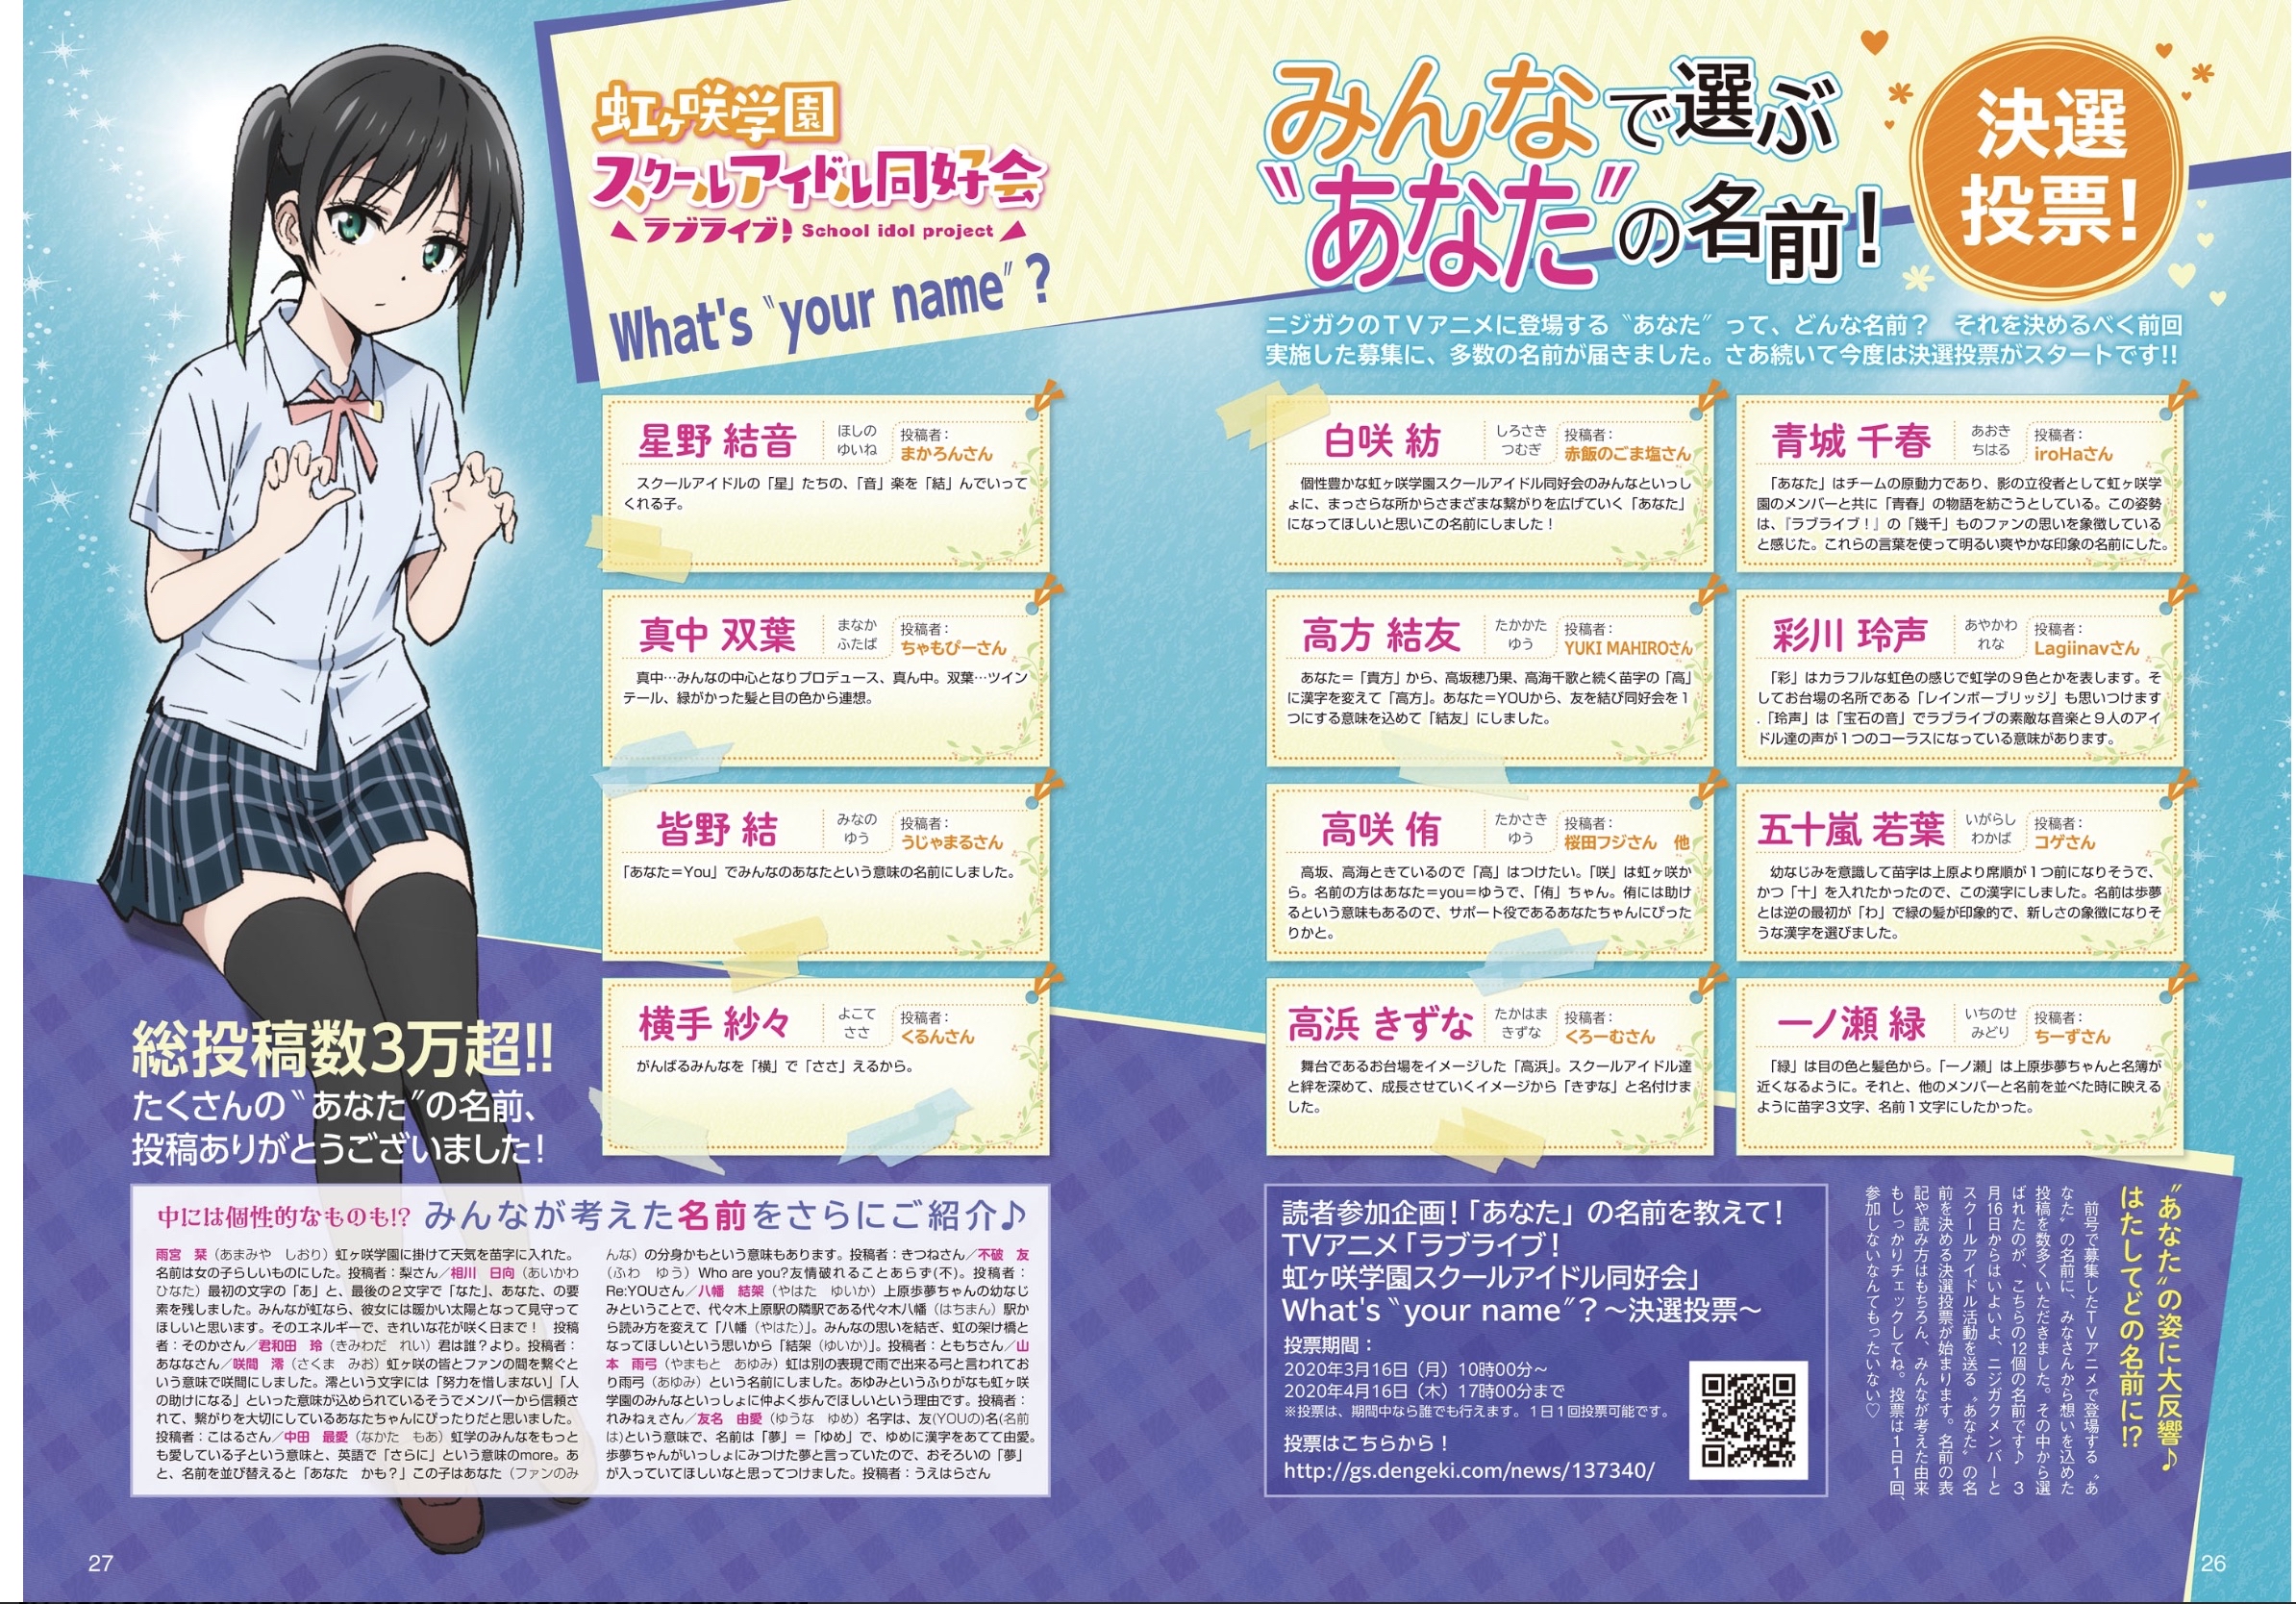 Love Live Wikia Nijigasaki Anata Chan S Potential Names Have Been Announced Voting Period March 16 10 00 Jst April 16 17 00 Jst Link T Co Rhznvma9lk 星野結音 Hoshino Yuine 真中双葉